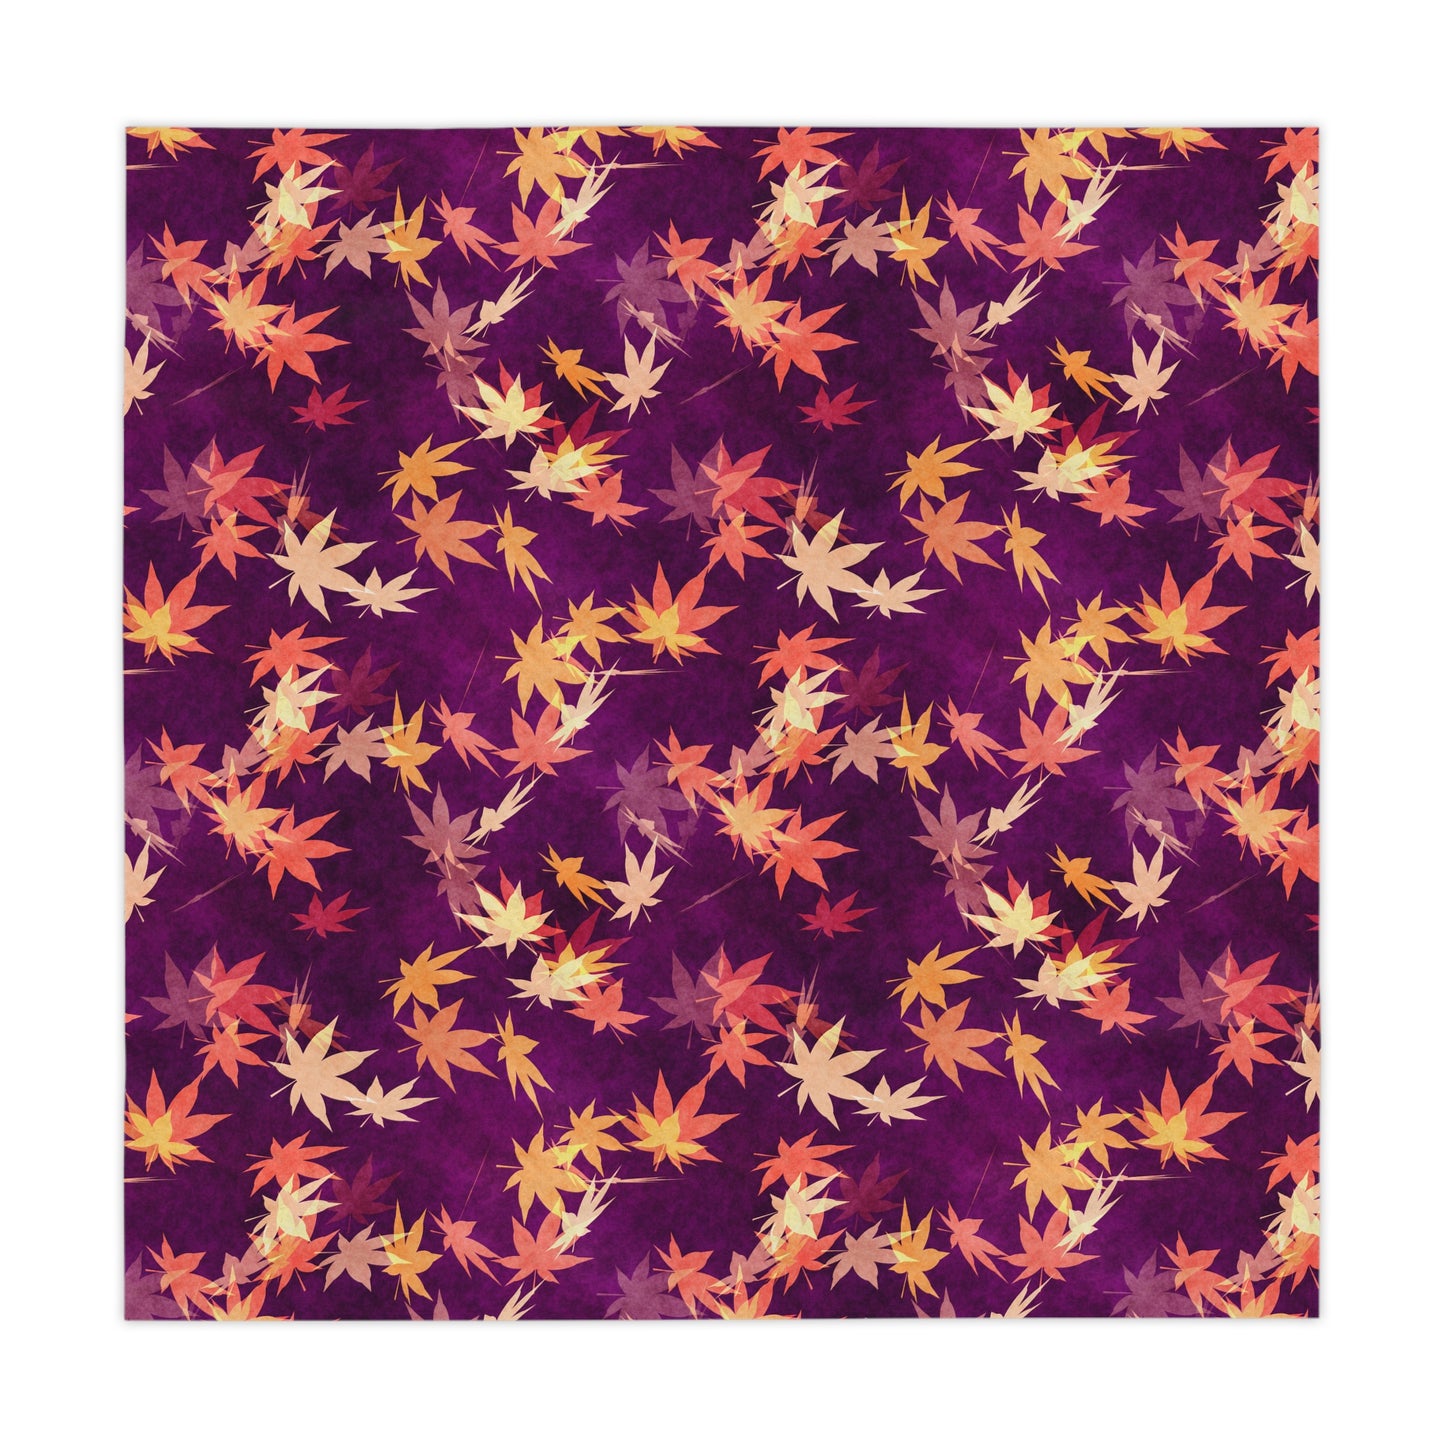 Autumn Leaves Tablecloth